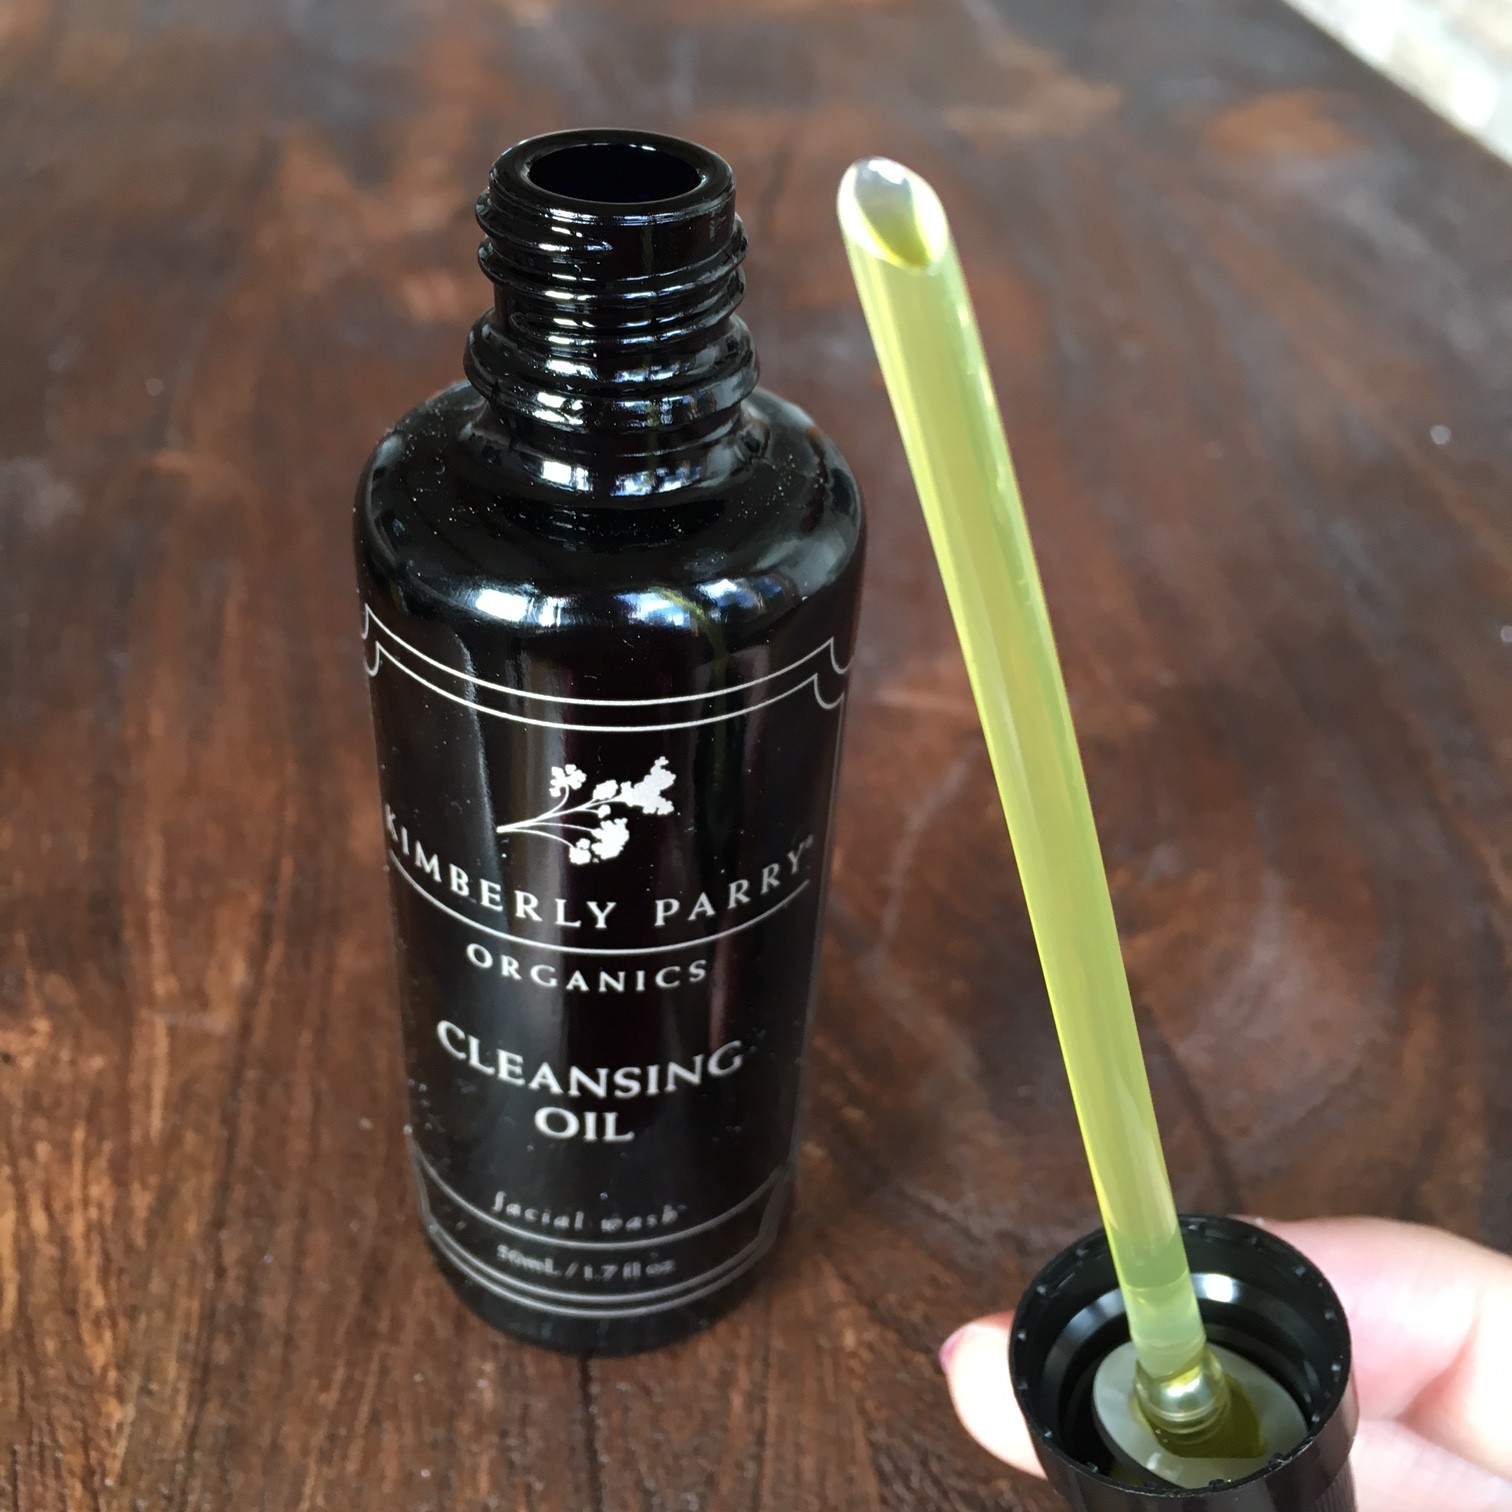 Kimberly Parry cleansing oil